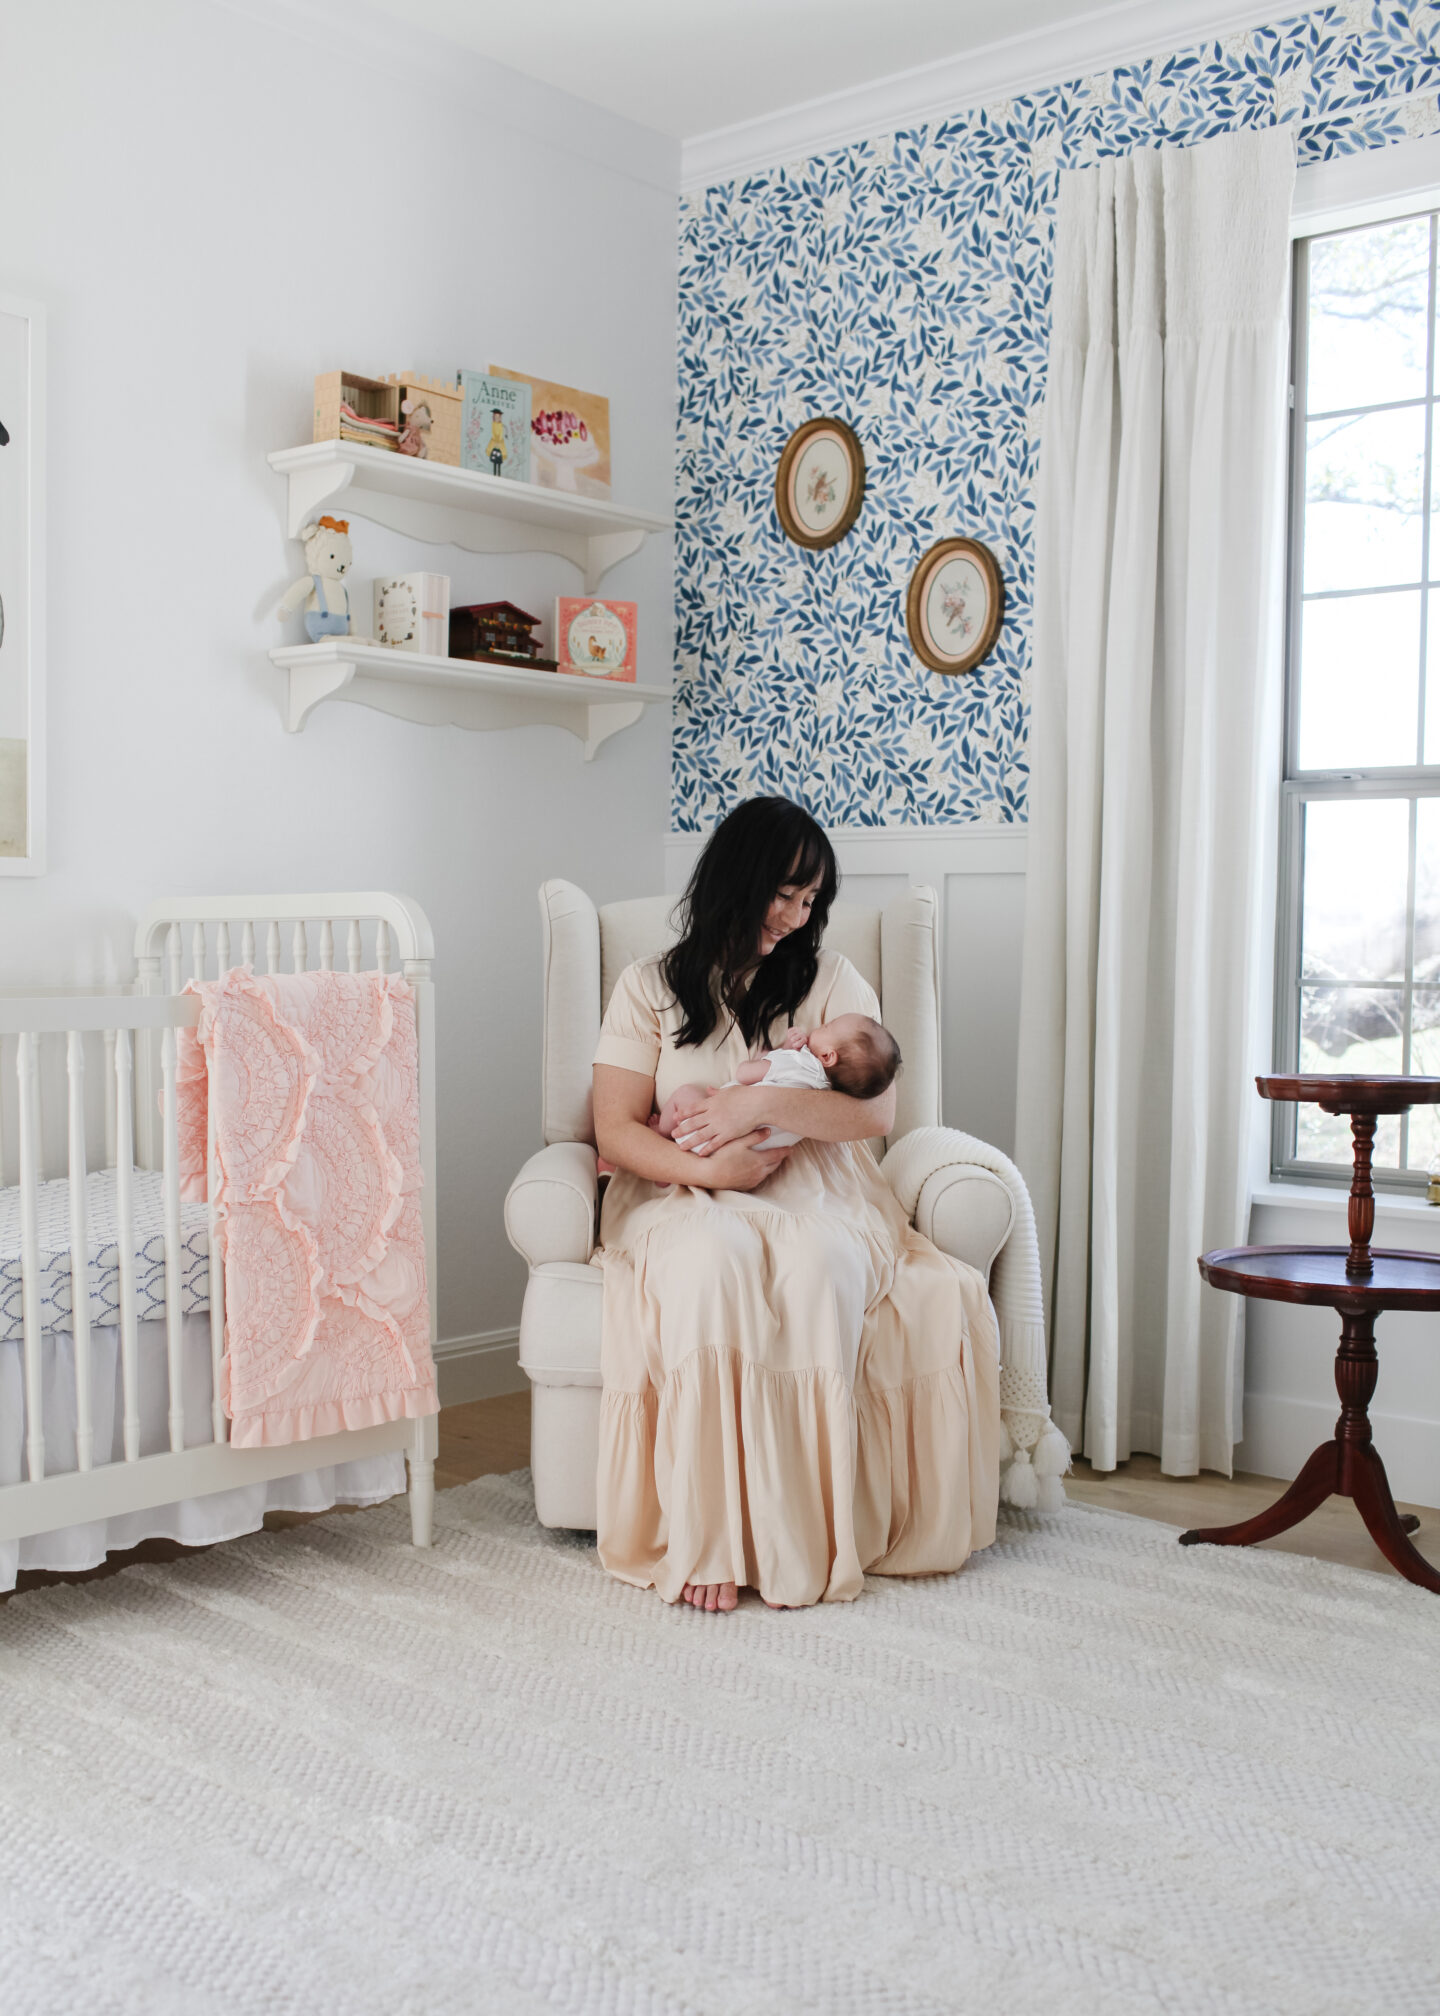 Baby girl nursery with blue and white wallpaper, floating shelves, crib, curtains, vintage pie crust table and rug